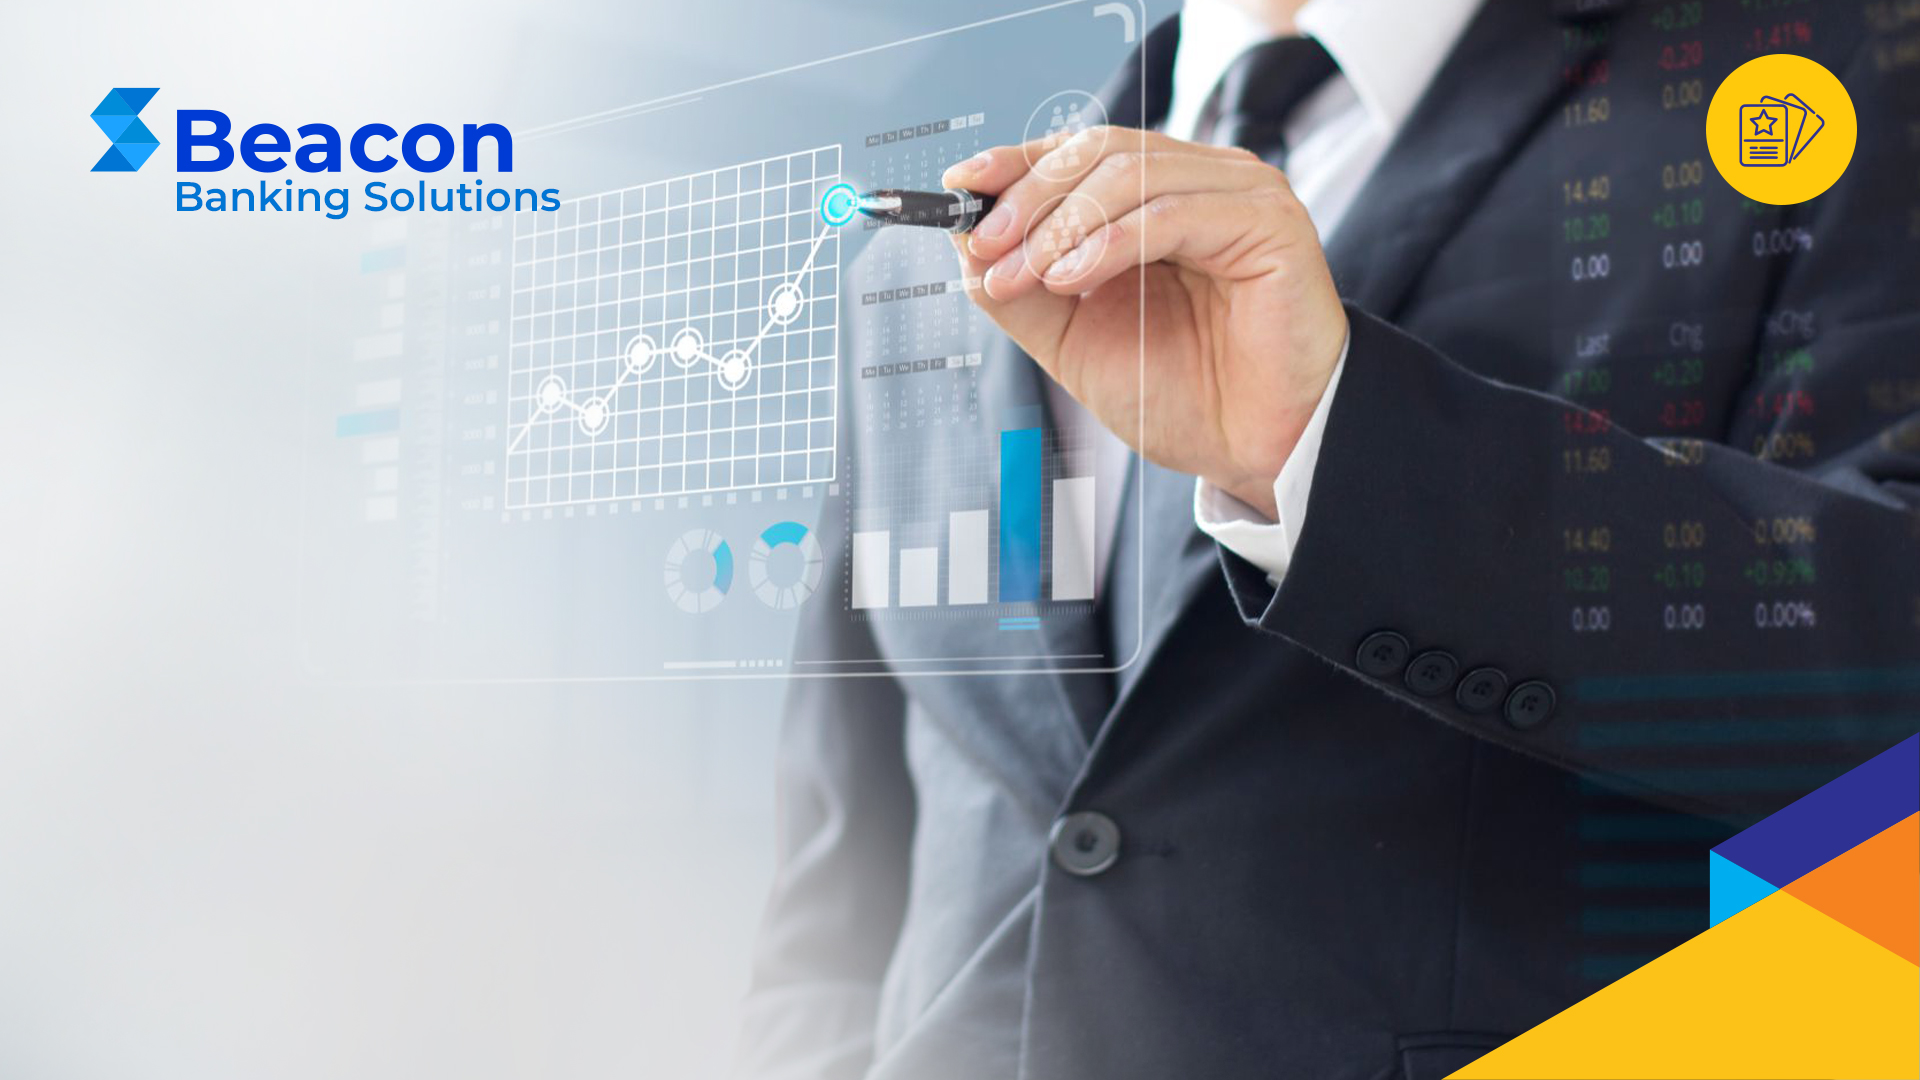 Beacon Banking Solutions